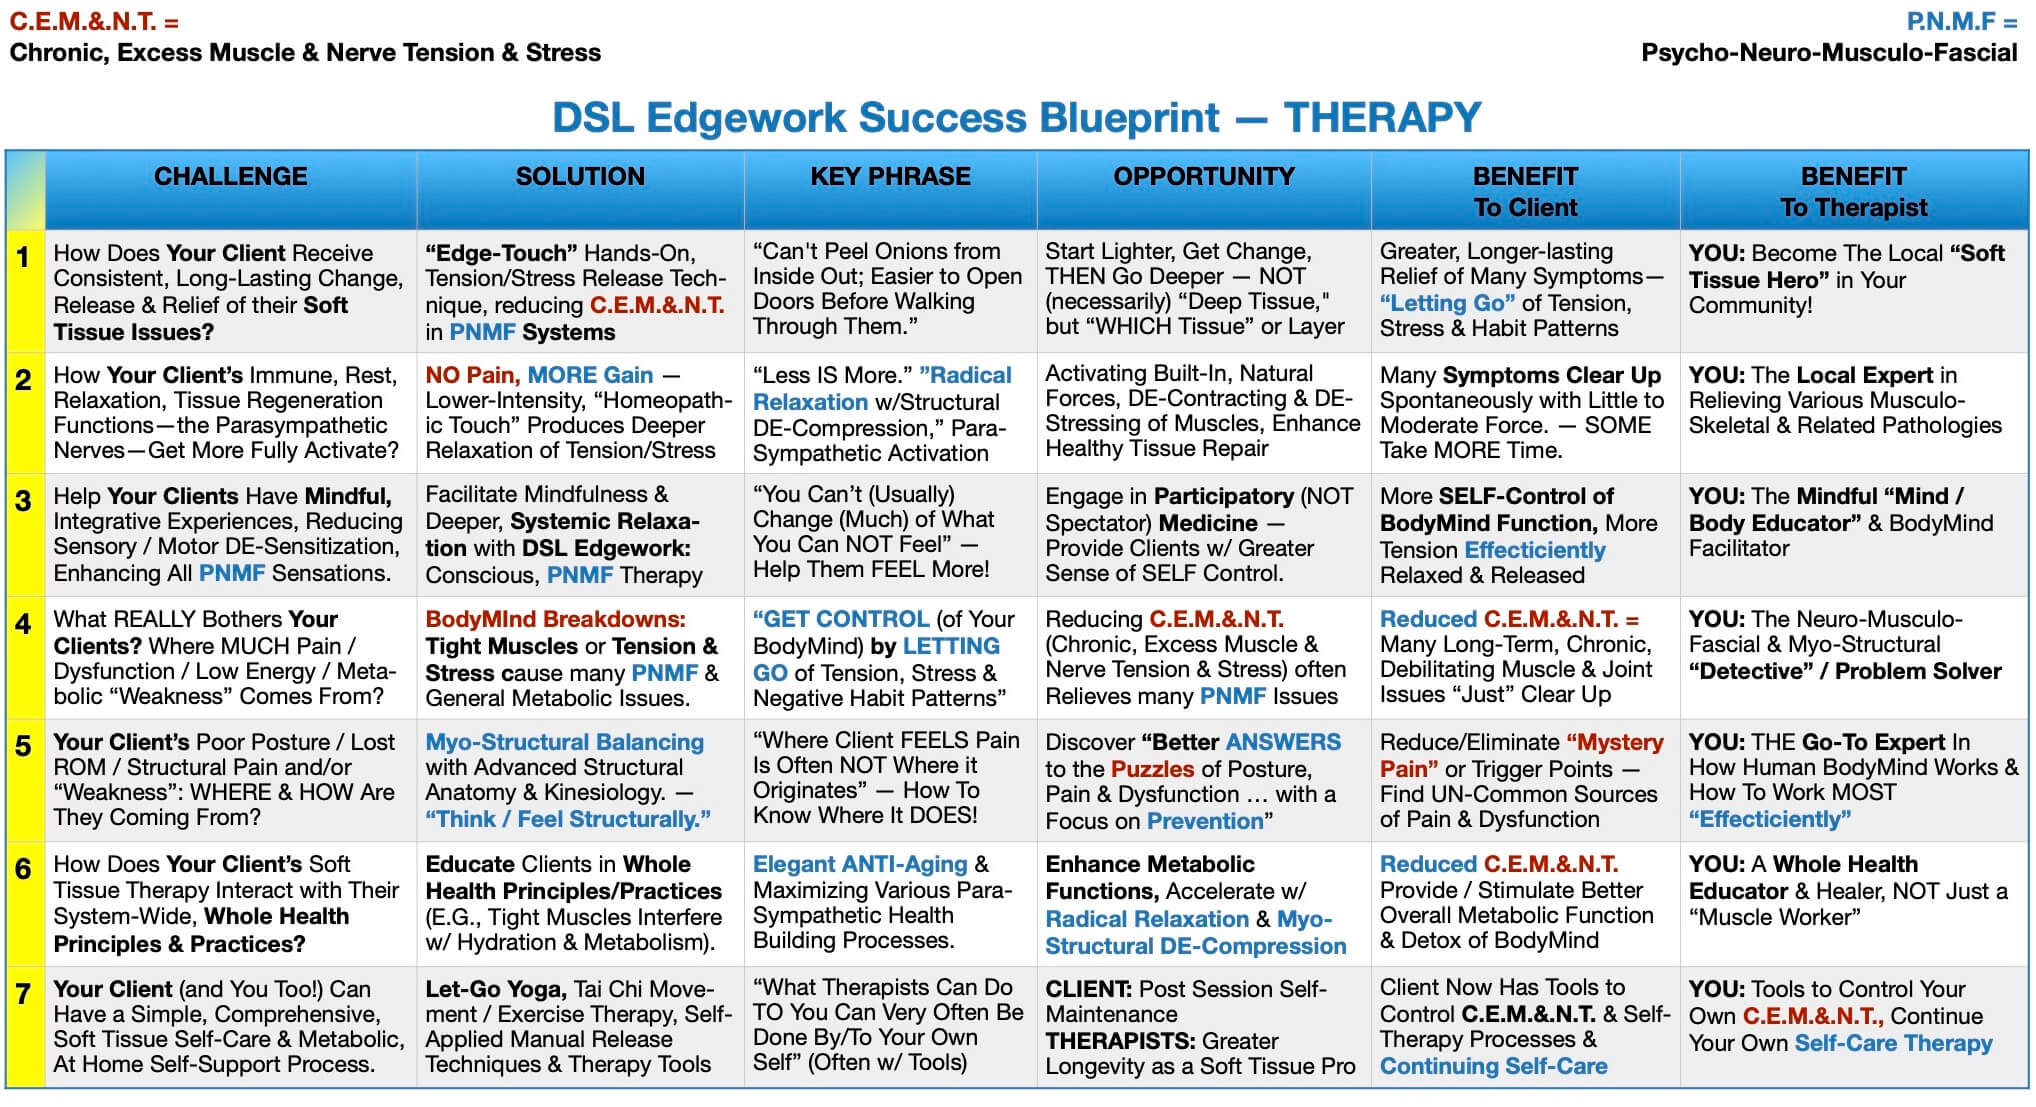 Success Blueprint for Therapy knowledge & skill